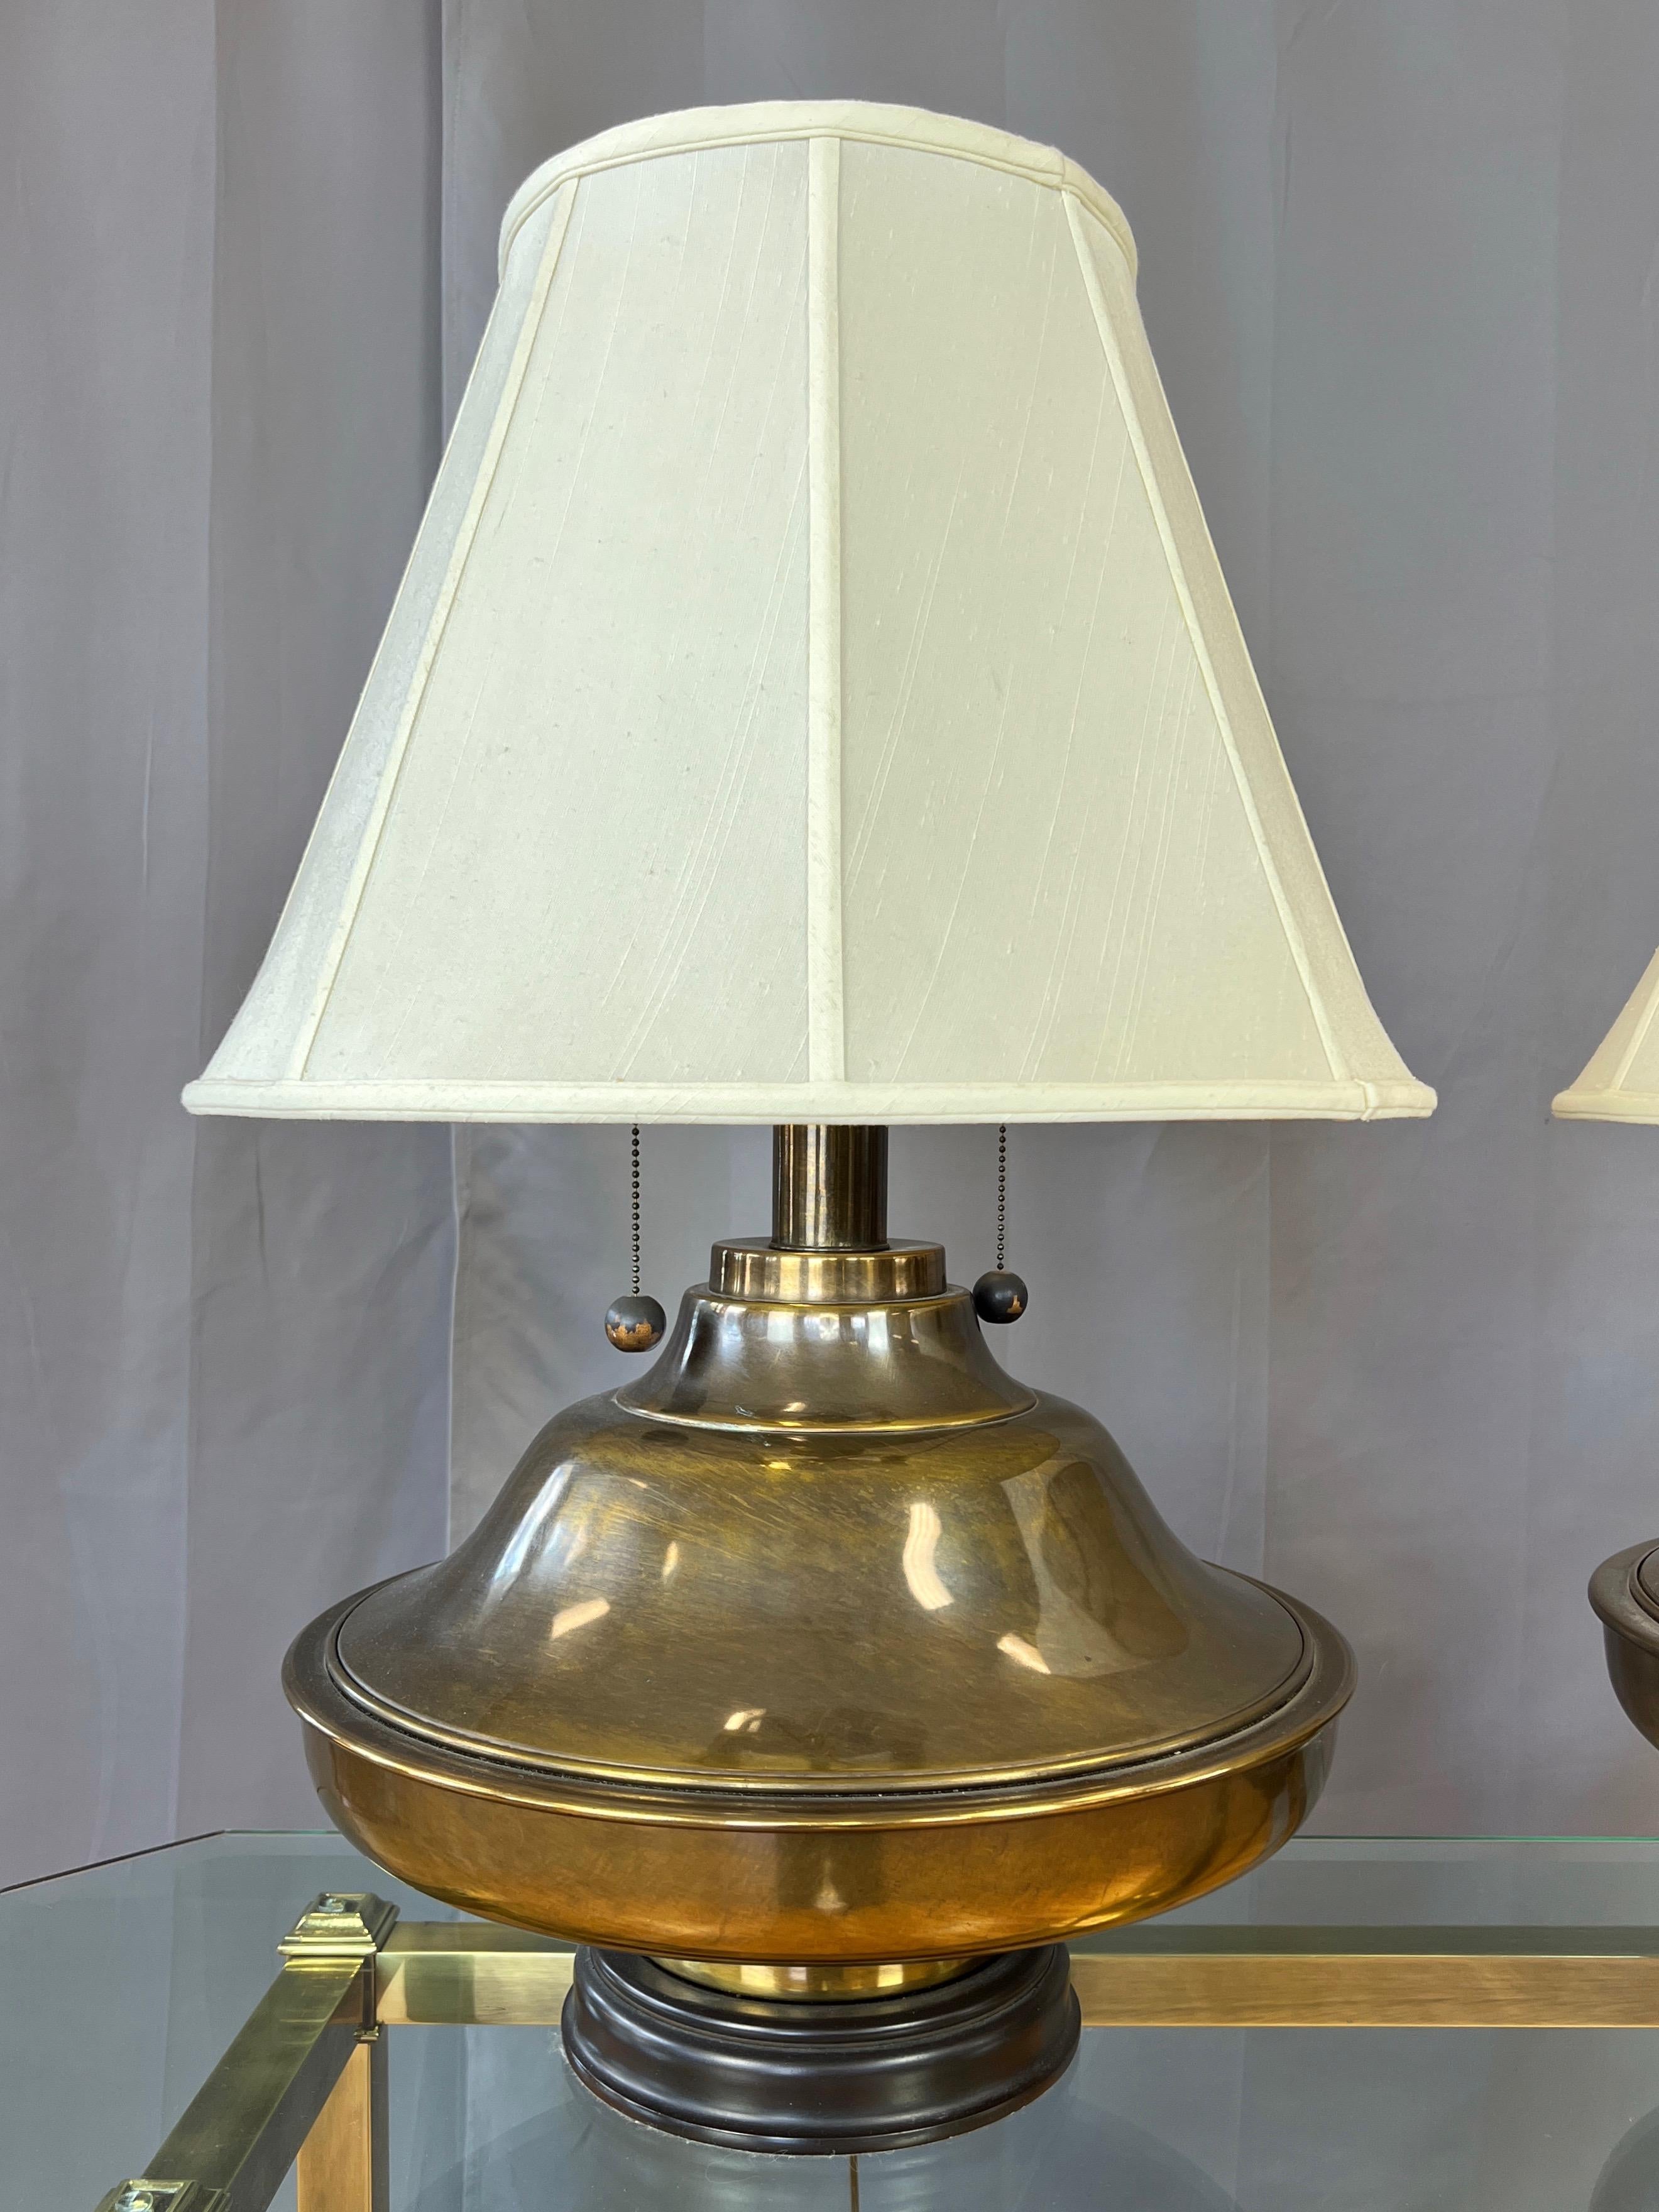 Hollywood Regency Pair of Monumental Marbro-Style Antiqued Brass Table Lamps with Shades, 1960s For Sale